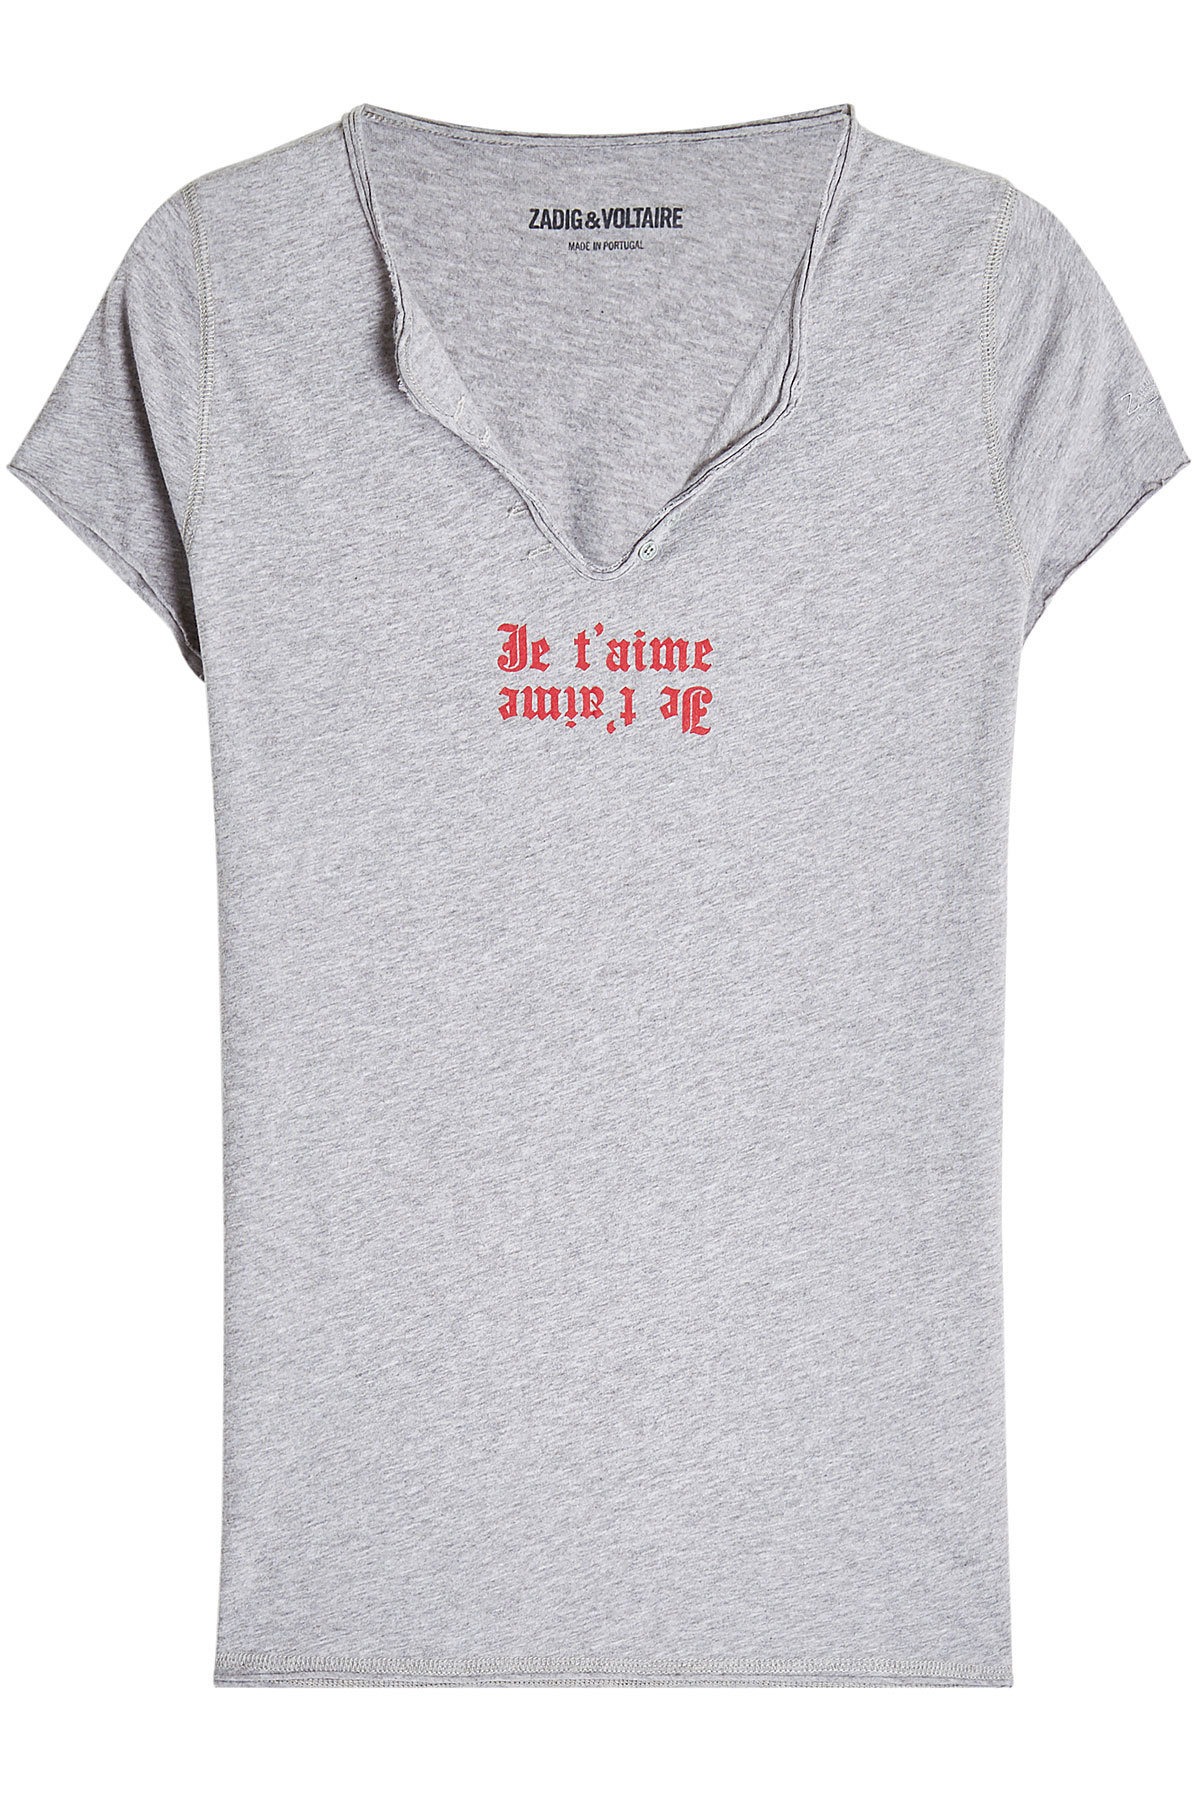 Je t'aime Cotton T-Shirt by Zadig & Voltaire